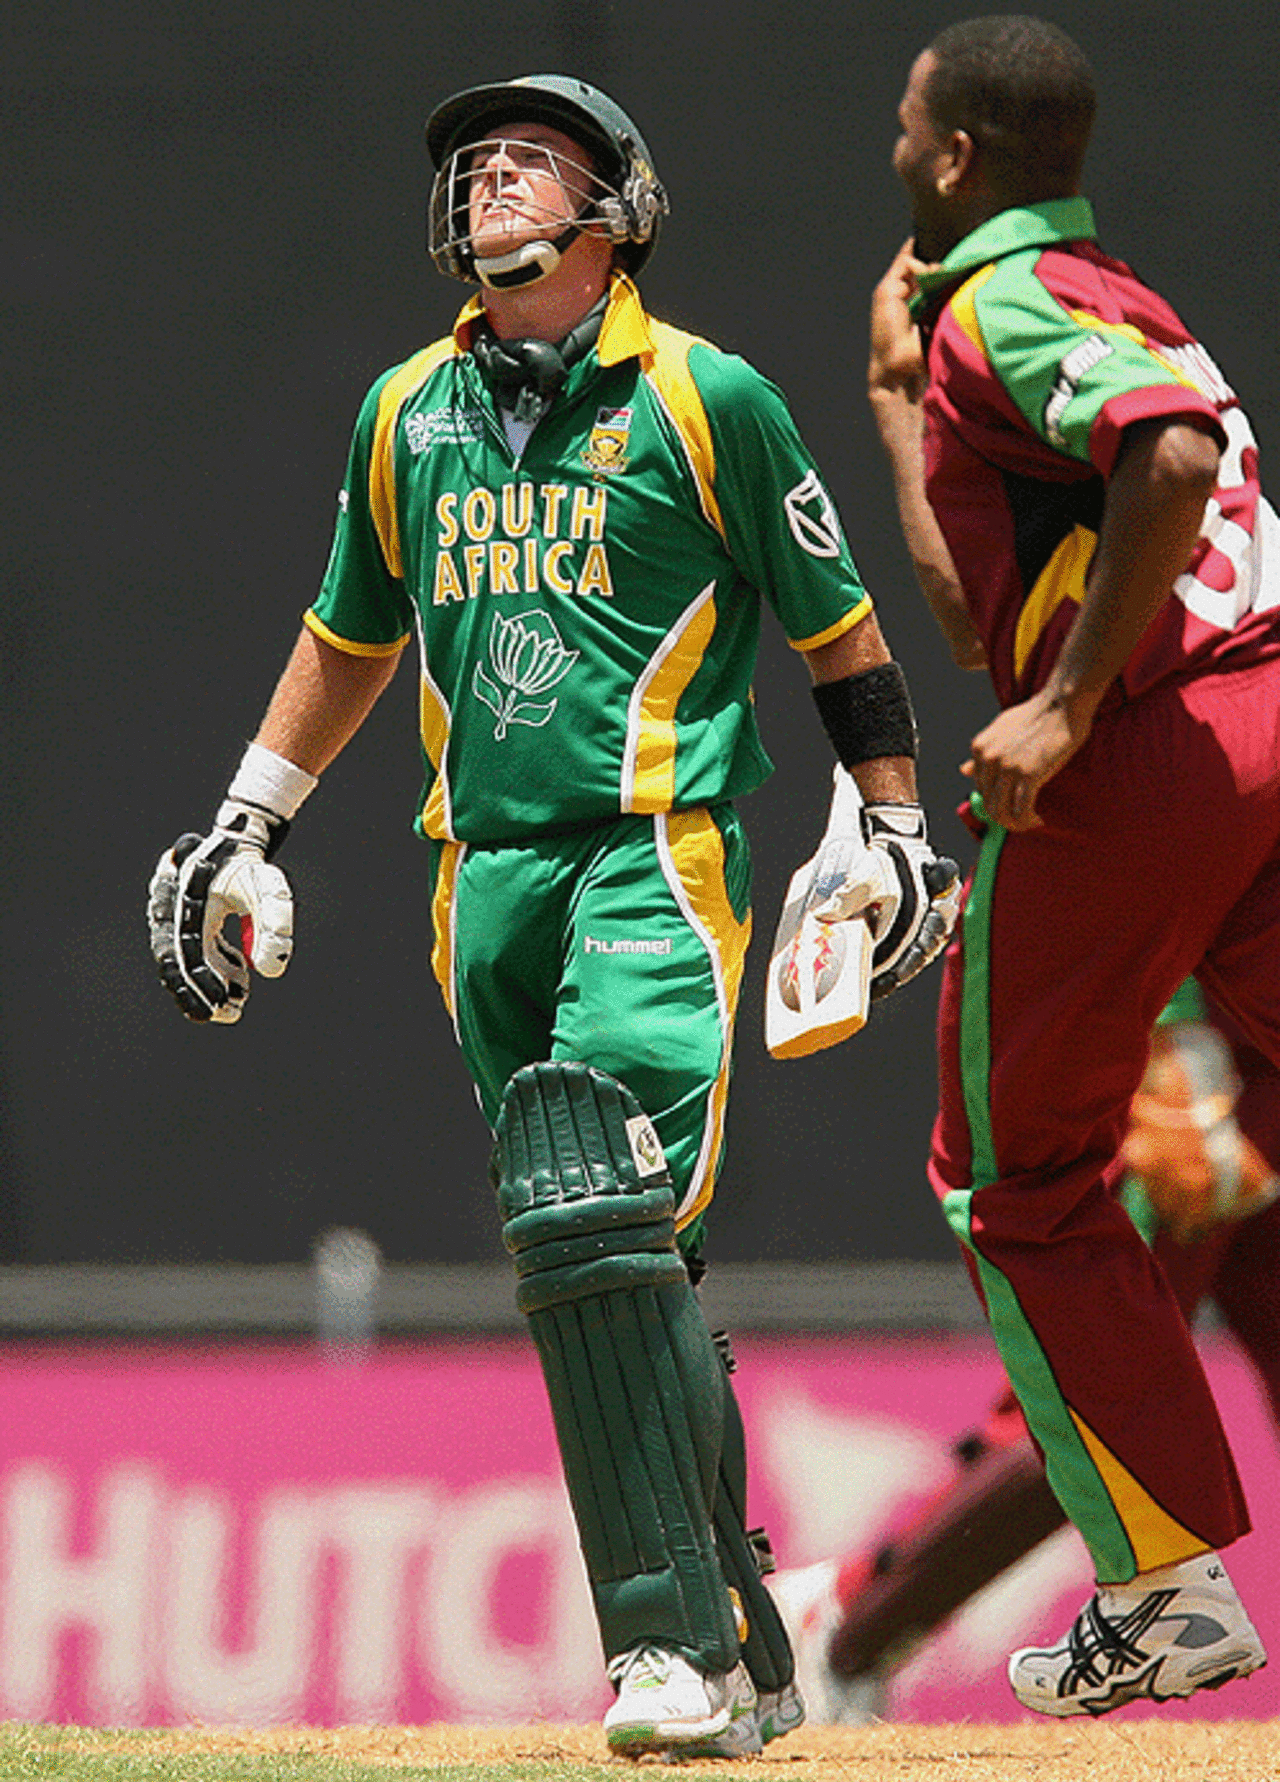 AB de Villiers is dismissed by Corey Collymore for 146, South Africa v West Indies, Super Eights, Grenada, April 10, 2007